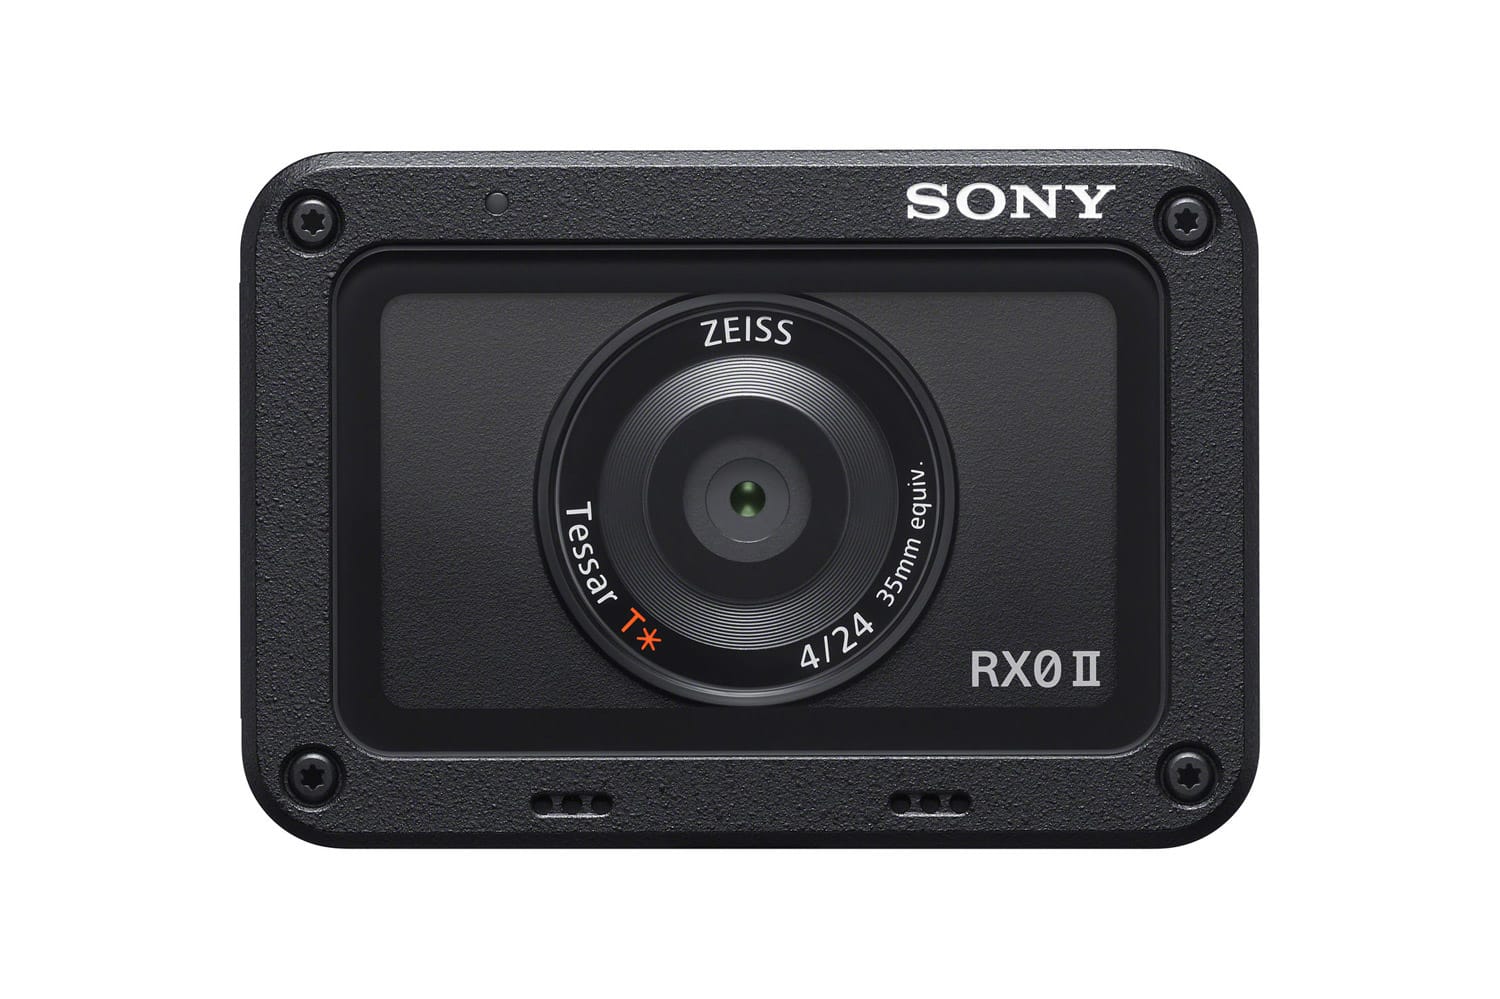 https://www.colbybrownphotography.com/wp-content/uploads/2019/06/Sony-RX0-II-Review-2.jpg